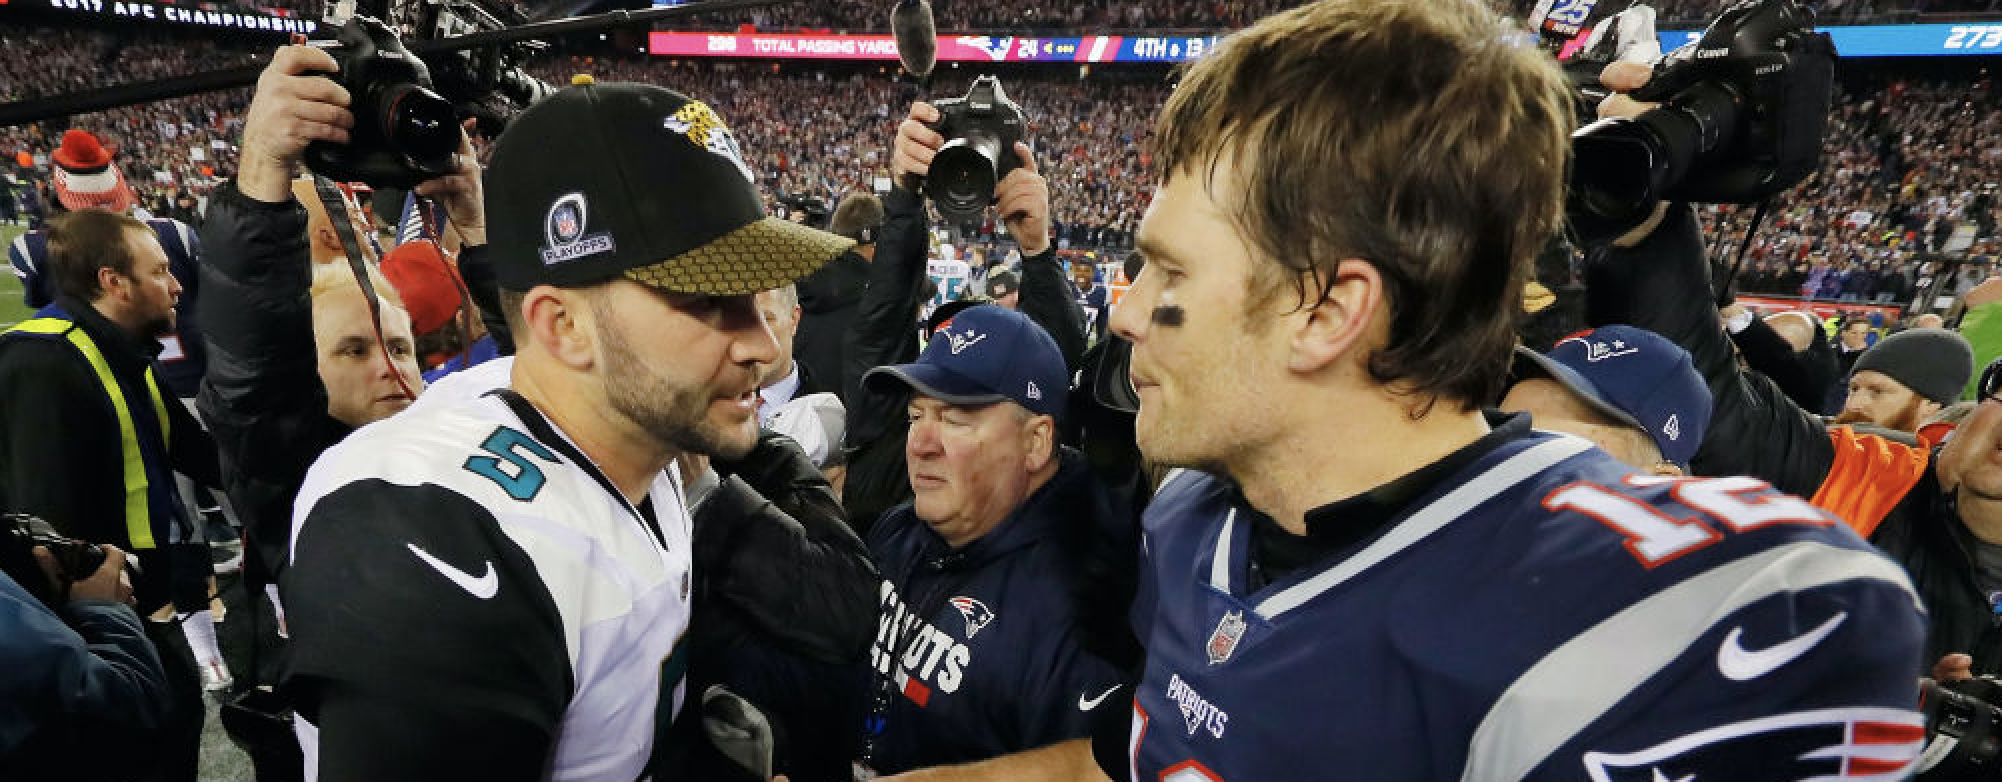 FOXBOROUGH, MA - JANUARY 21: Tom Brady #12 of the New England Patriots shakes hands with Blake Bortles #5 of the Jacksonville Jaguars after the AFC Championship Game at Gillette Stadium on January 21, 2018 in Foxborough, Massachusetts. (Photo by Kevin C. Cox/Getty Images)